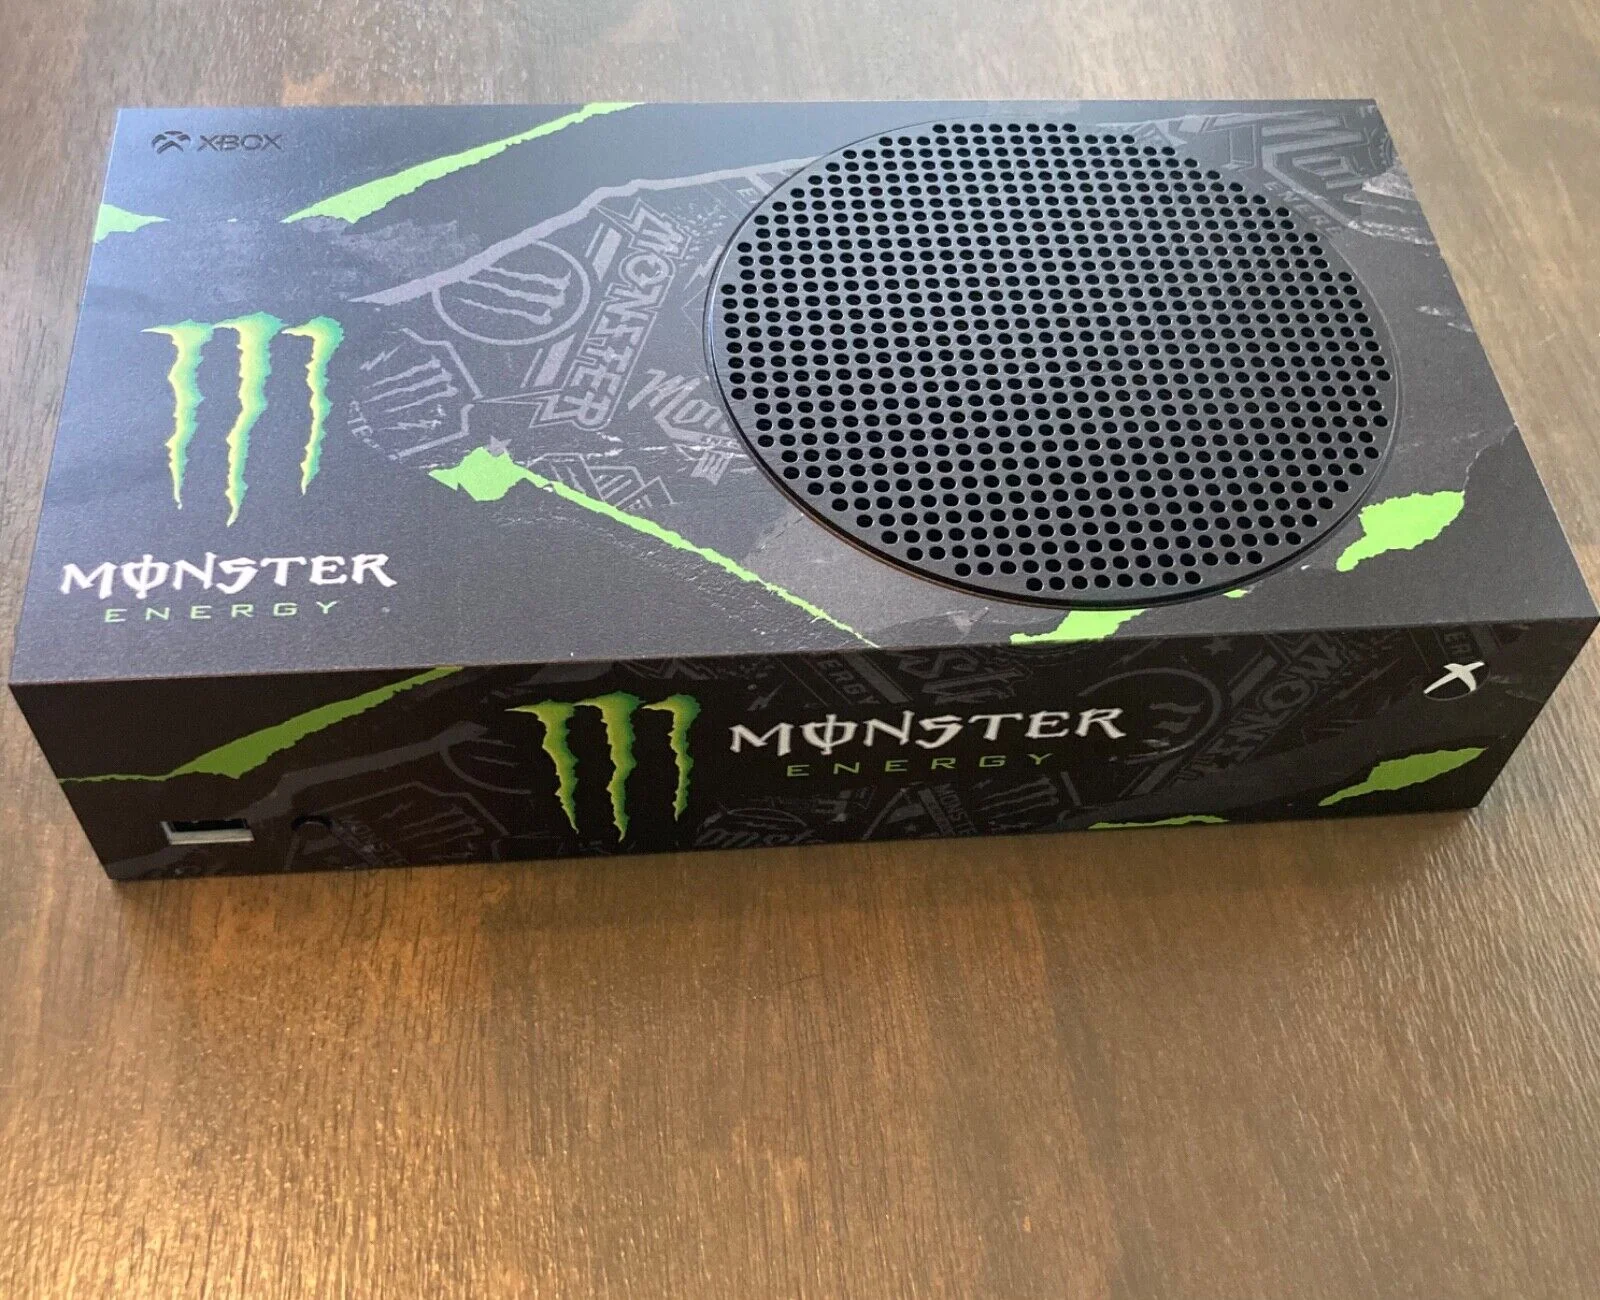  Microsoft Xbox Series S Monster Energy Console